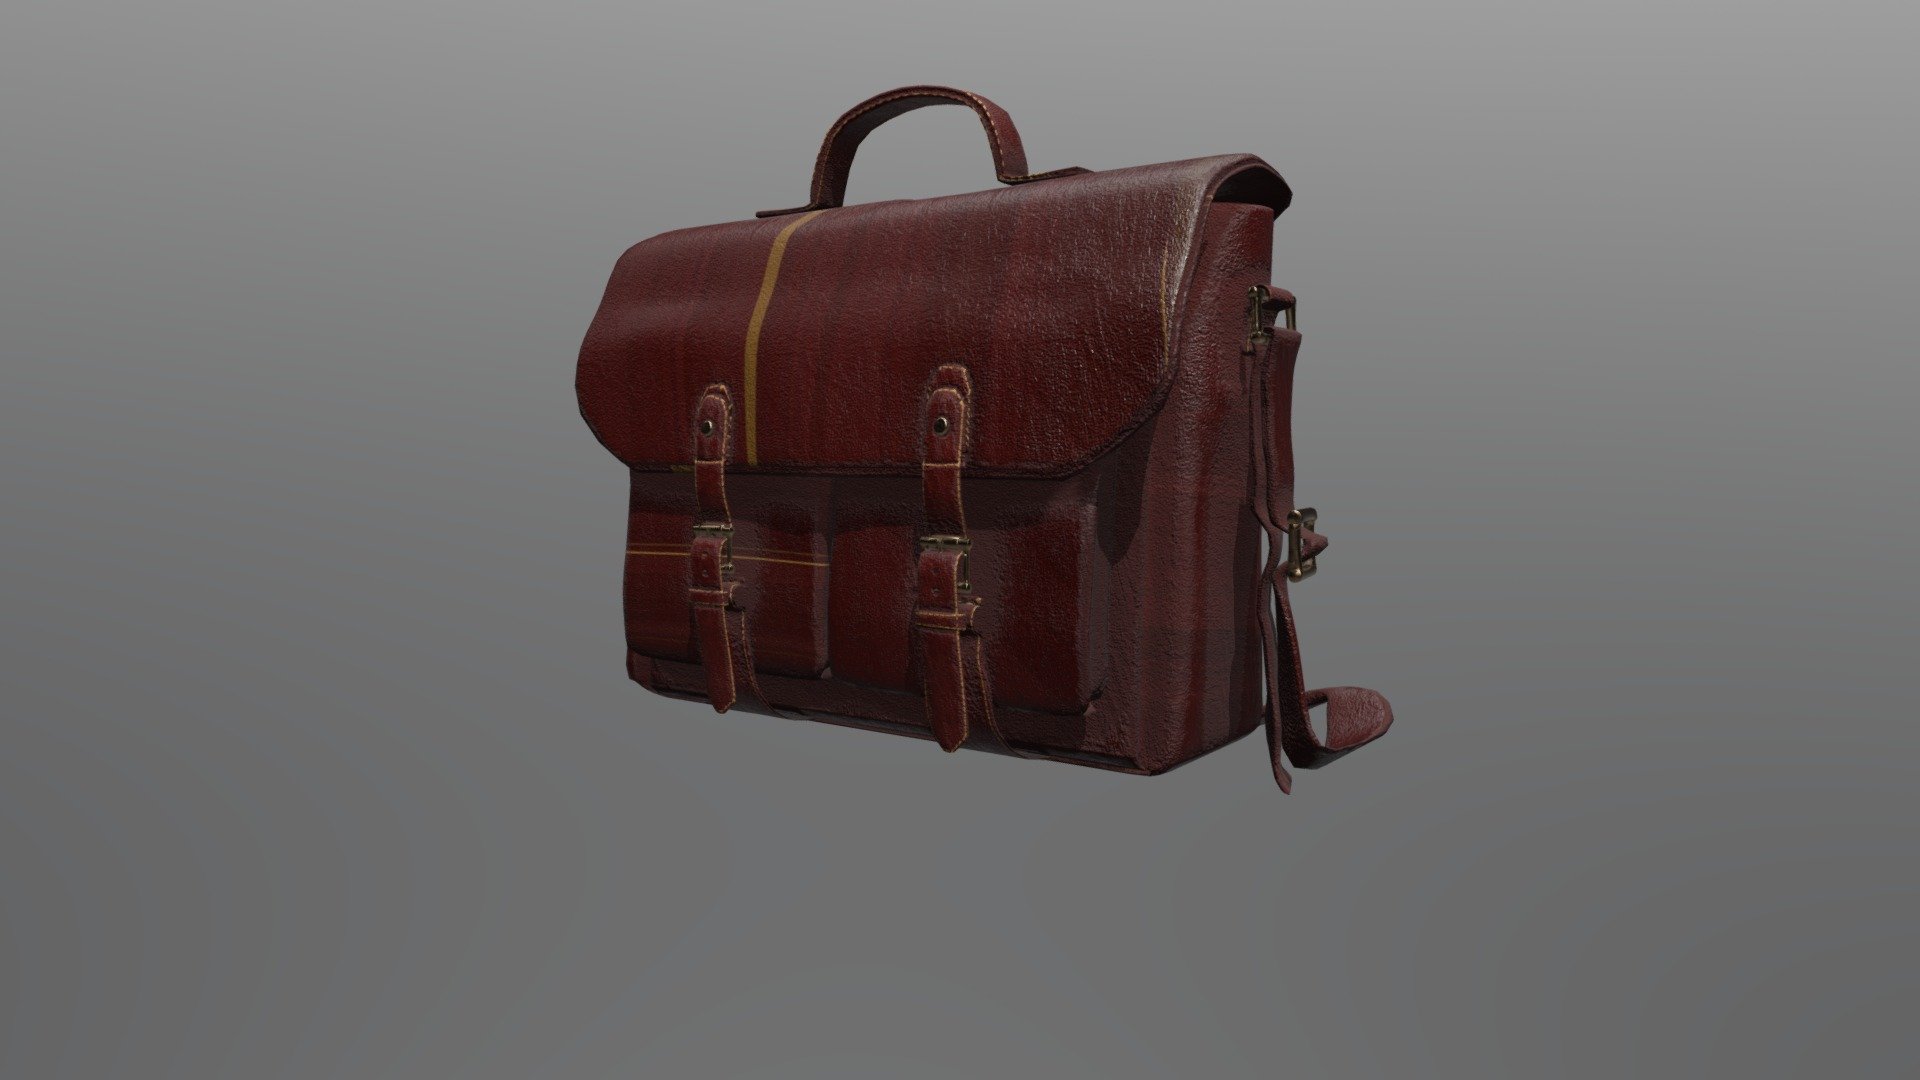 The model is a Vintage Satchel Bag, a soft leather bag with a handle and a shoulder strap, often used to carry books, notes, and documents, laptop - Vintage Satchel Bag - 3D model by Paridha Singh (@paridhasingh) 3d model